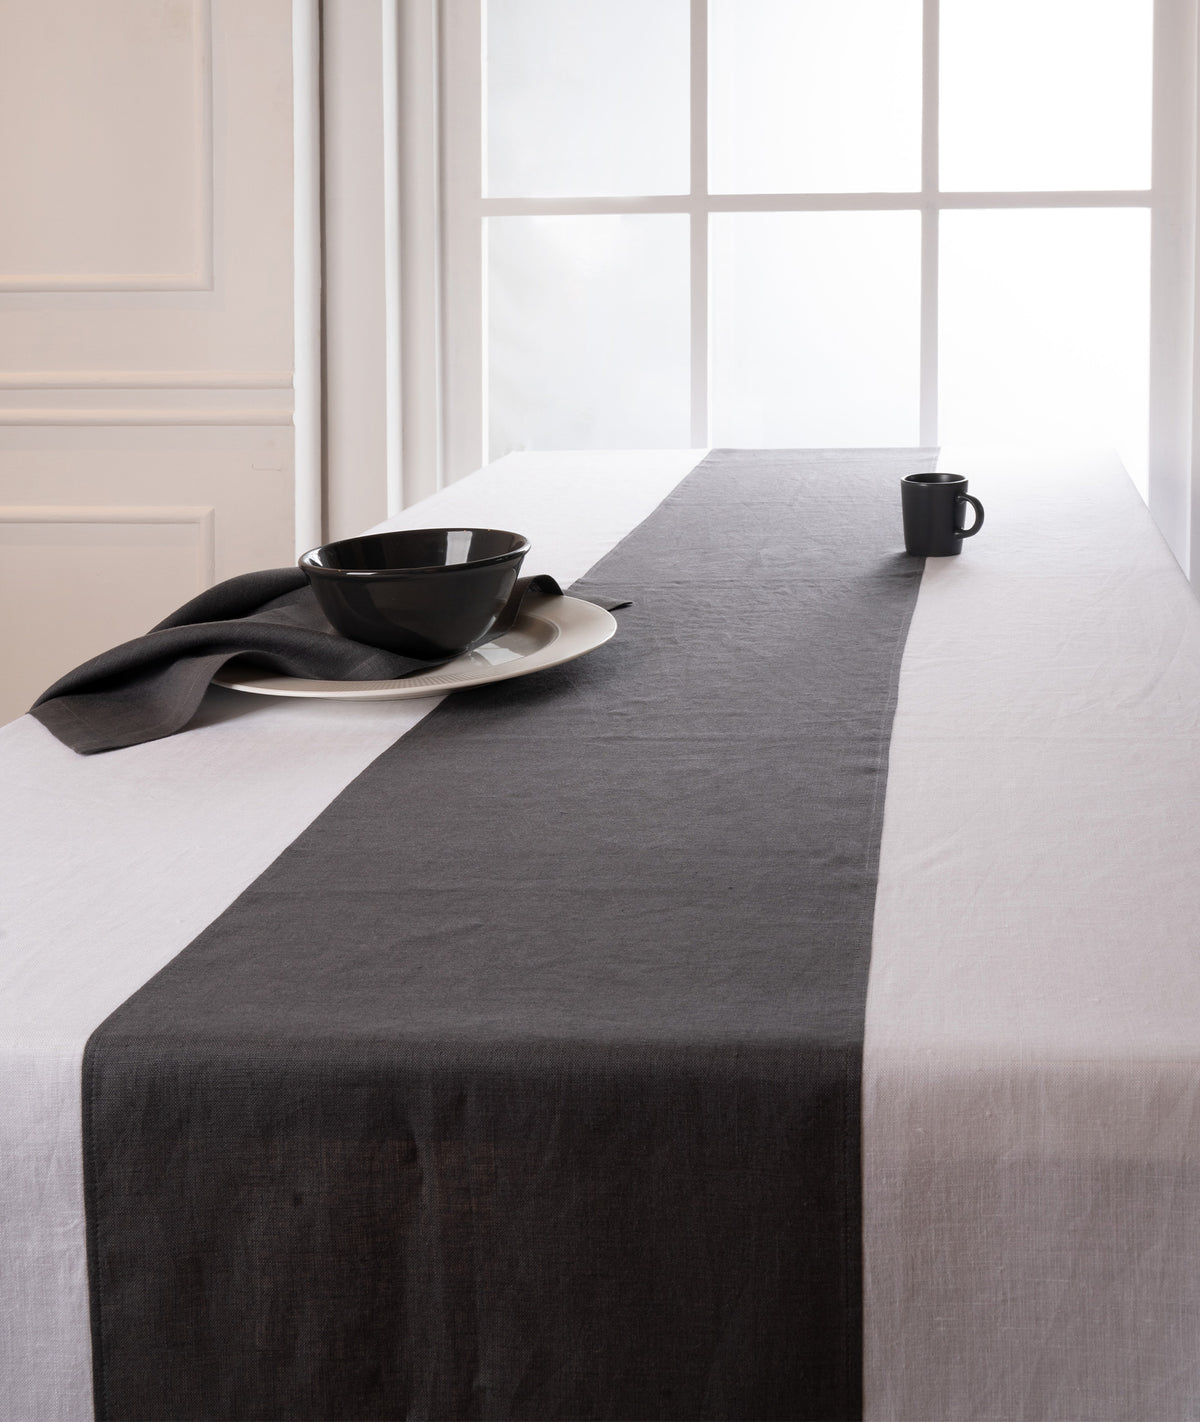 White and Charcoal Grey Linen Tablecloth - Splicing